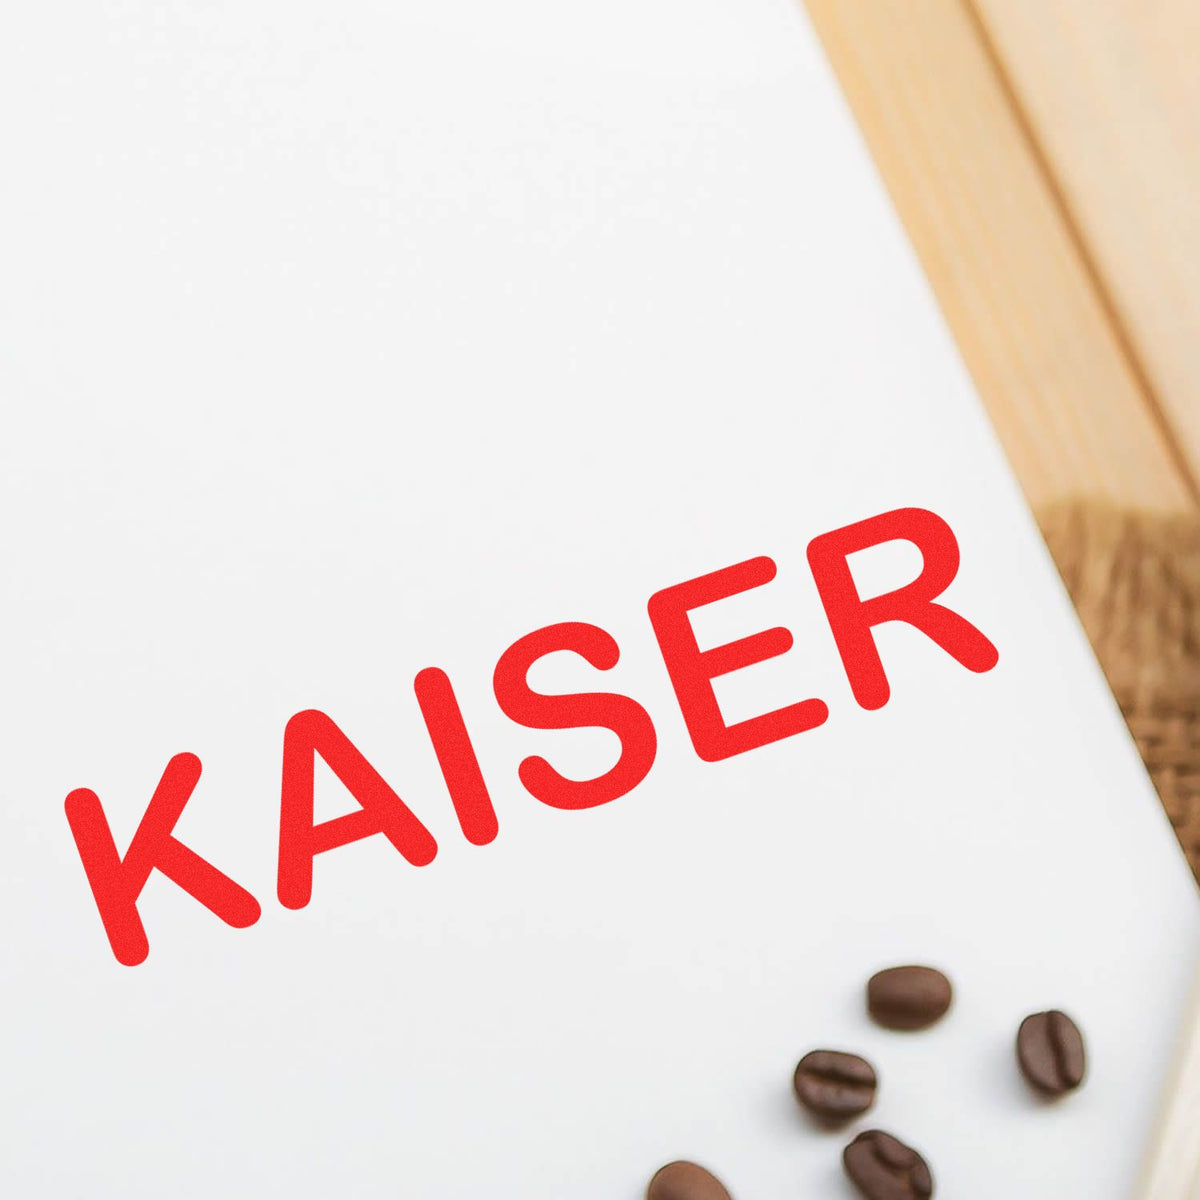 Large Kaiser Rubber Stamp In Use Photo